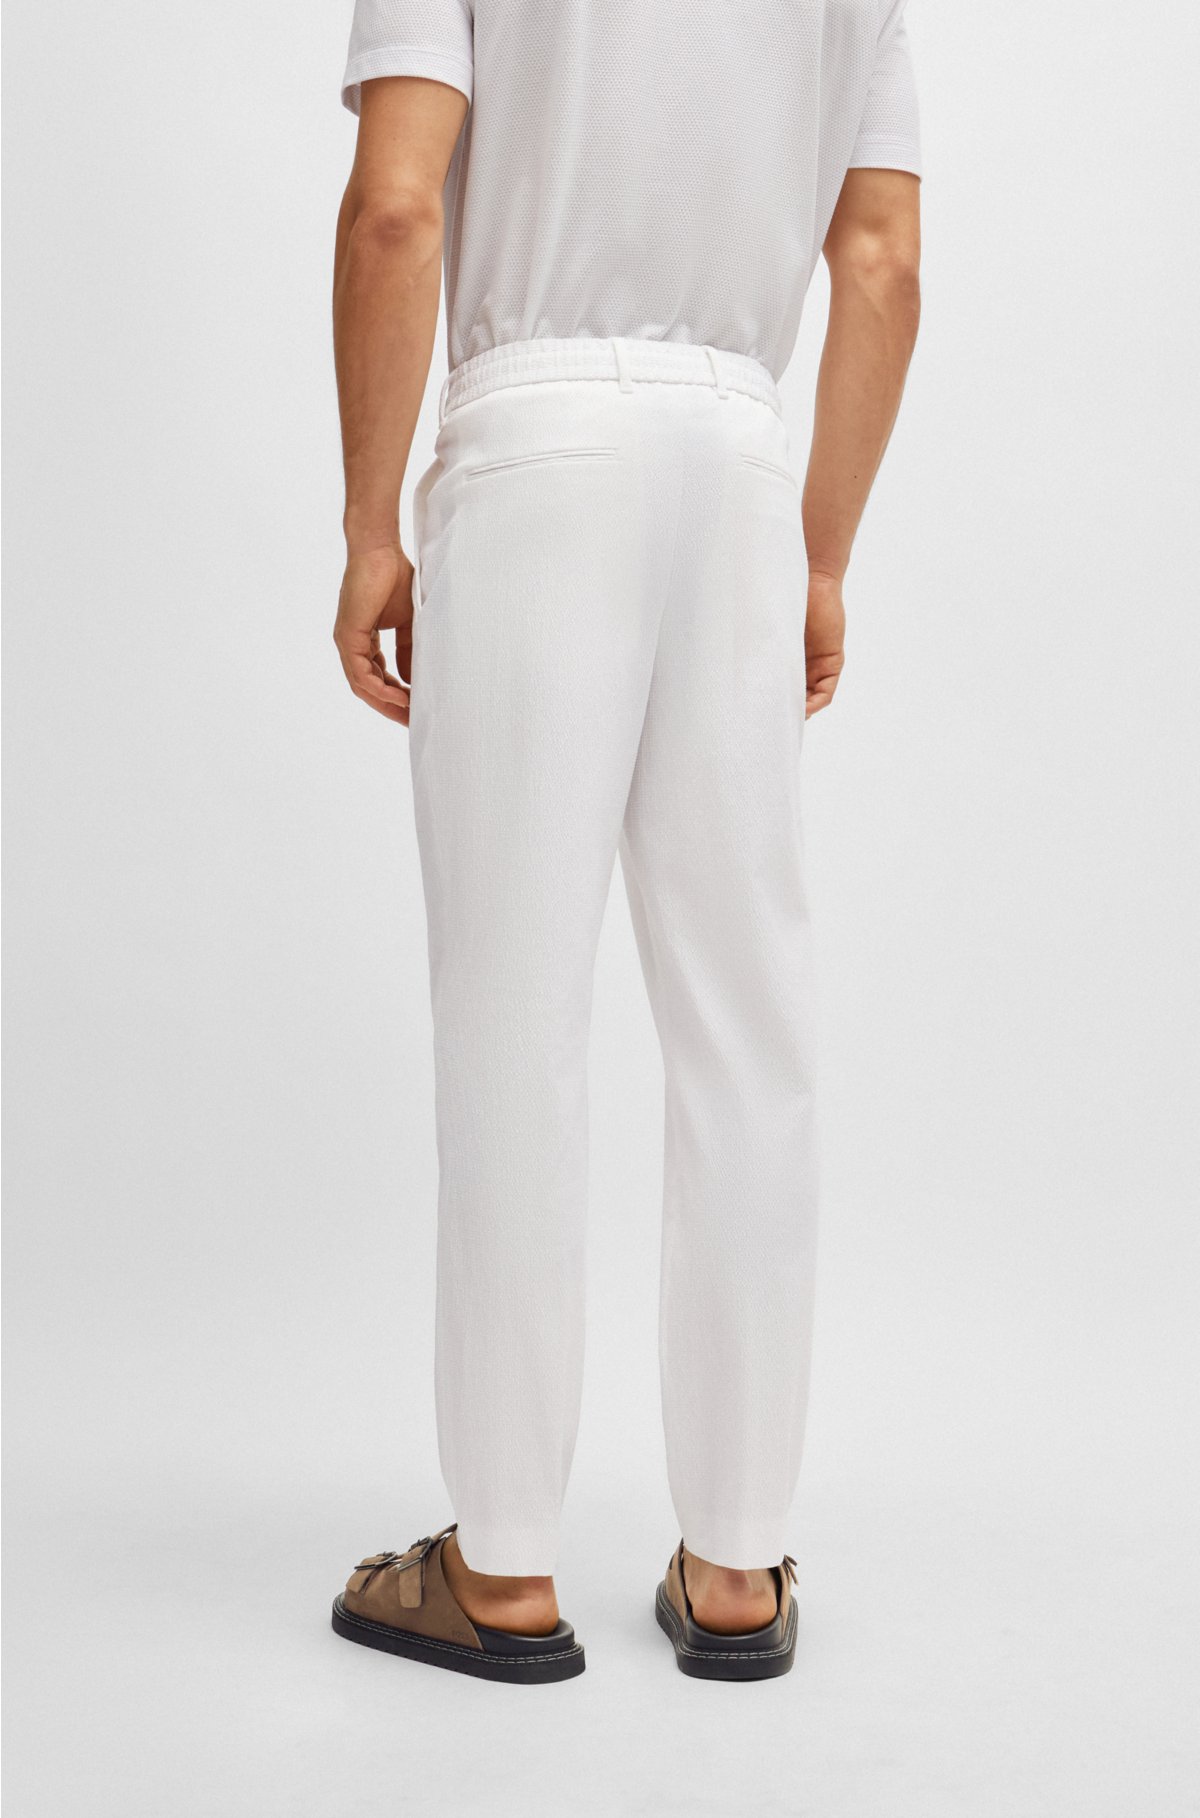 Relaxed-fit trousers in cotton-blend seersucker, White